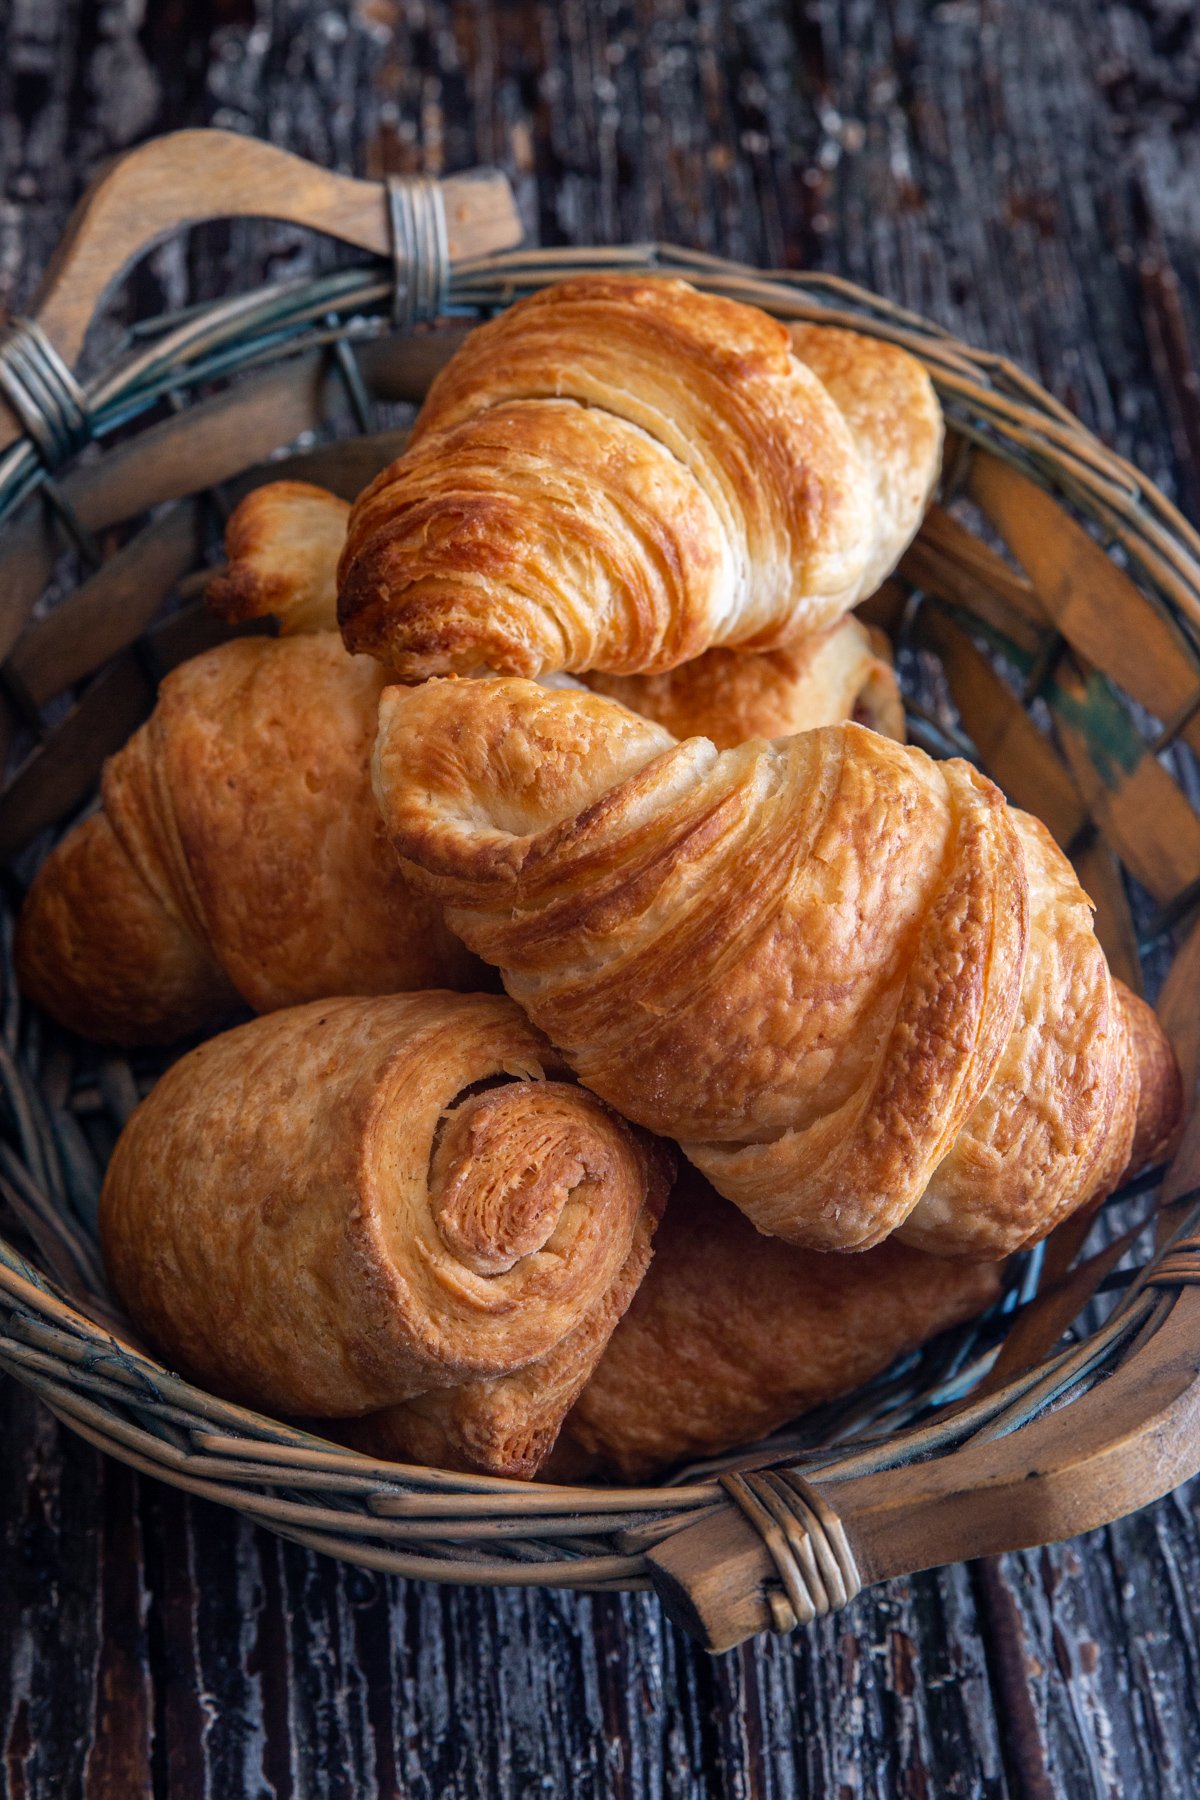 Croissant in a blue basket.